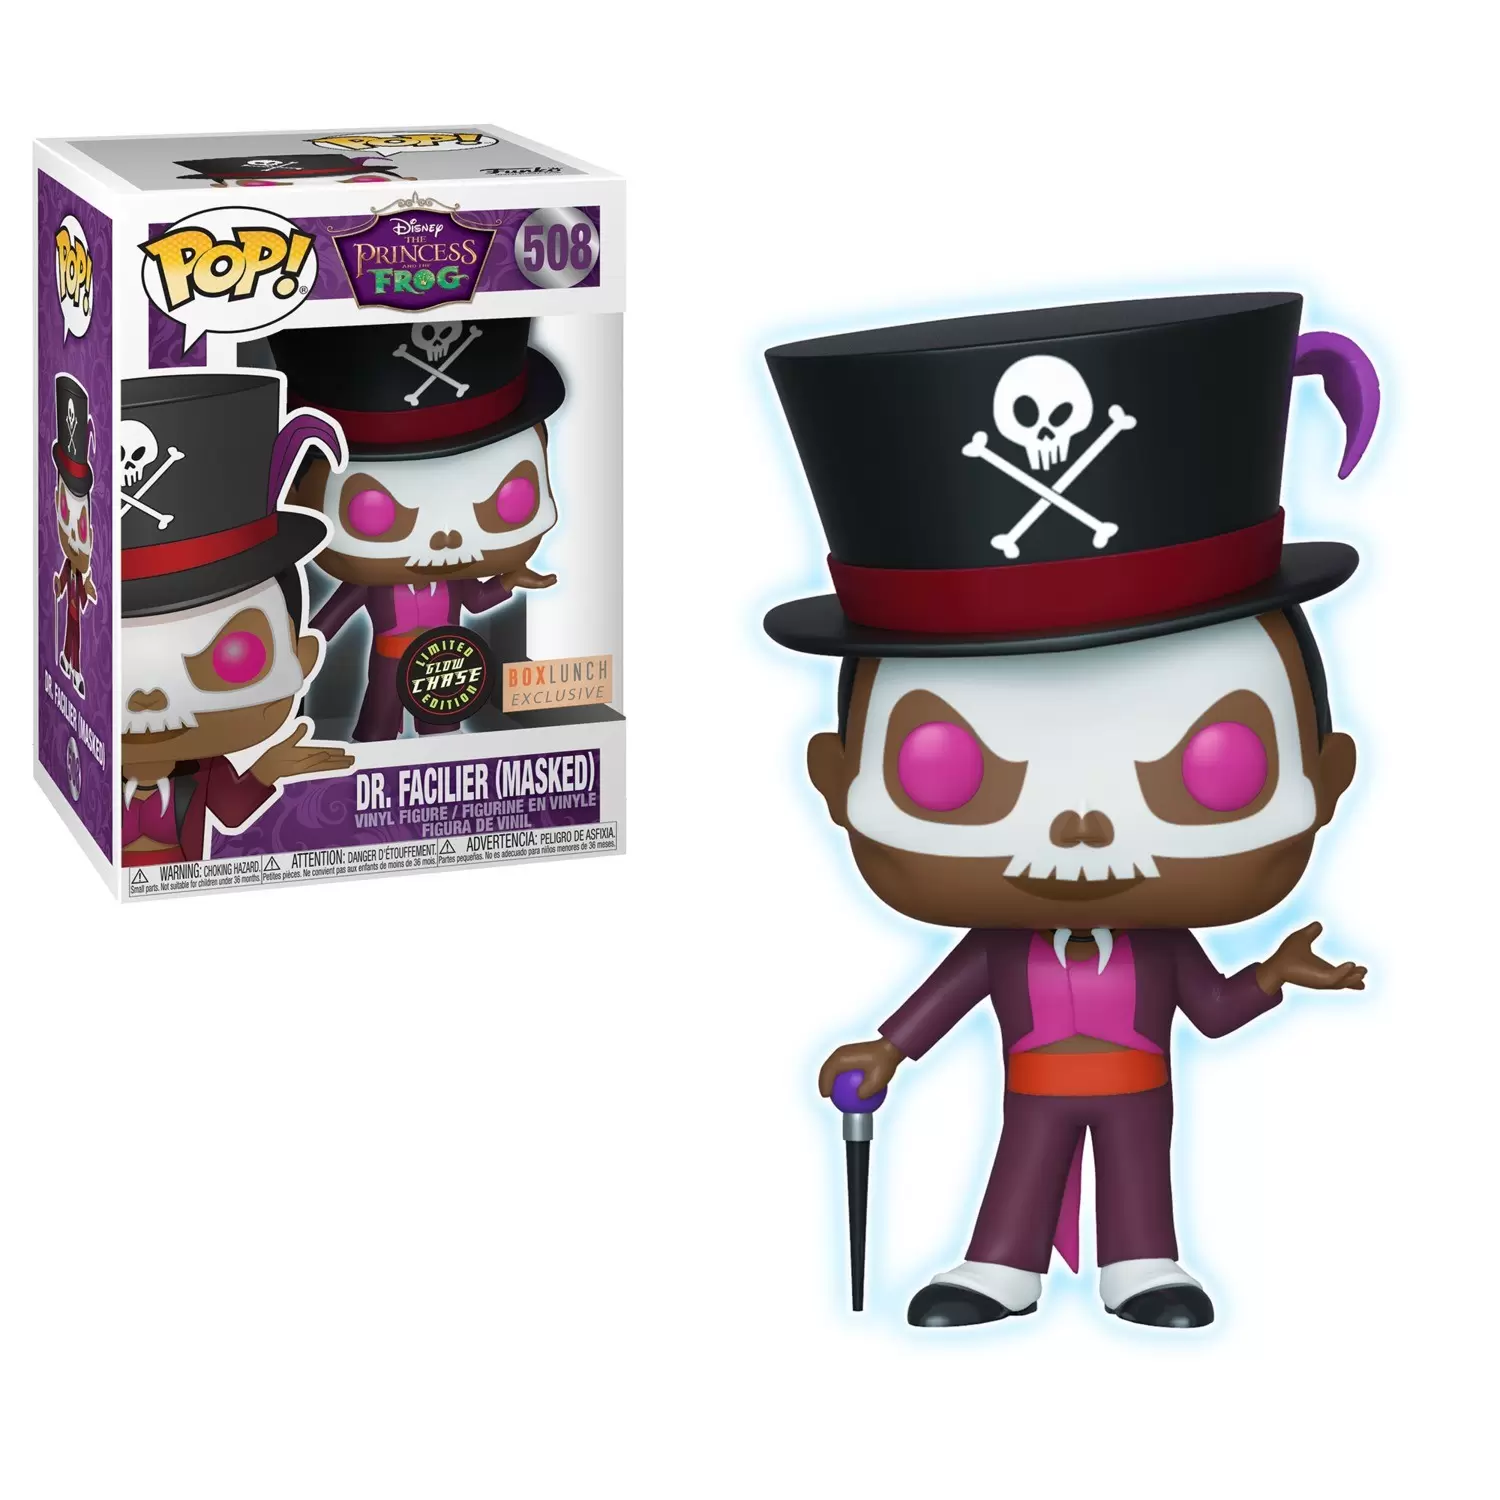 POP! Disney - The Princess and the Frog - Dr. Facilier Masked GITD Chase